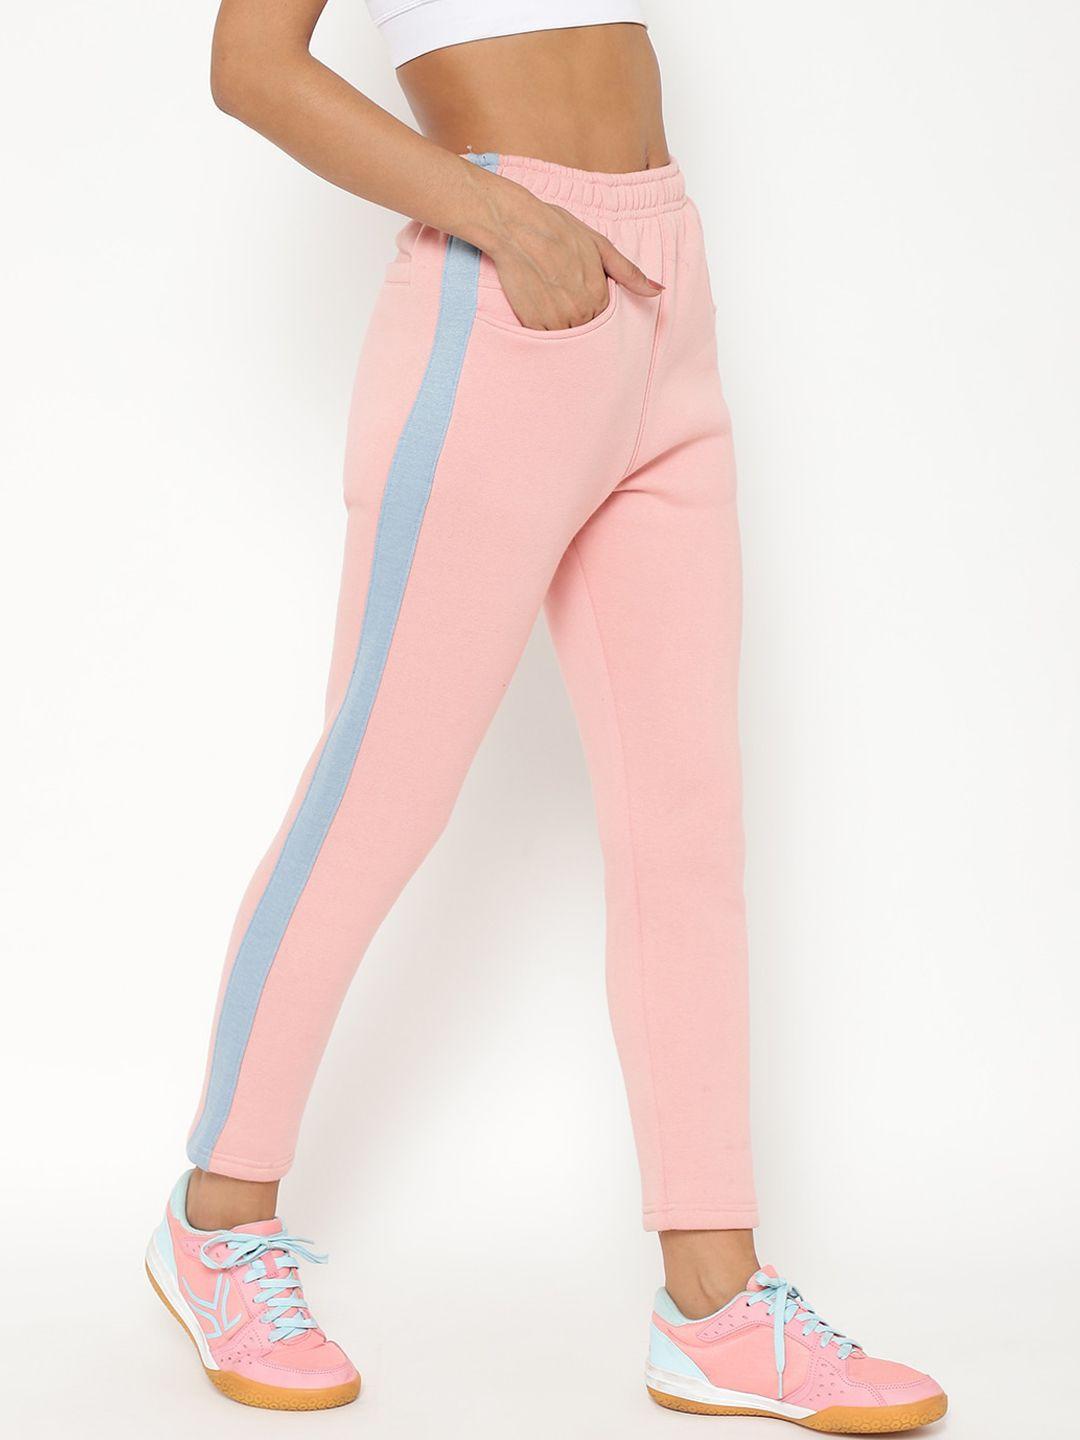 chkokko-women-pink-solid-straight-fit-antimicrobal-cotton-track-pants